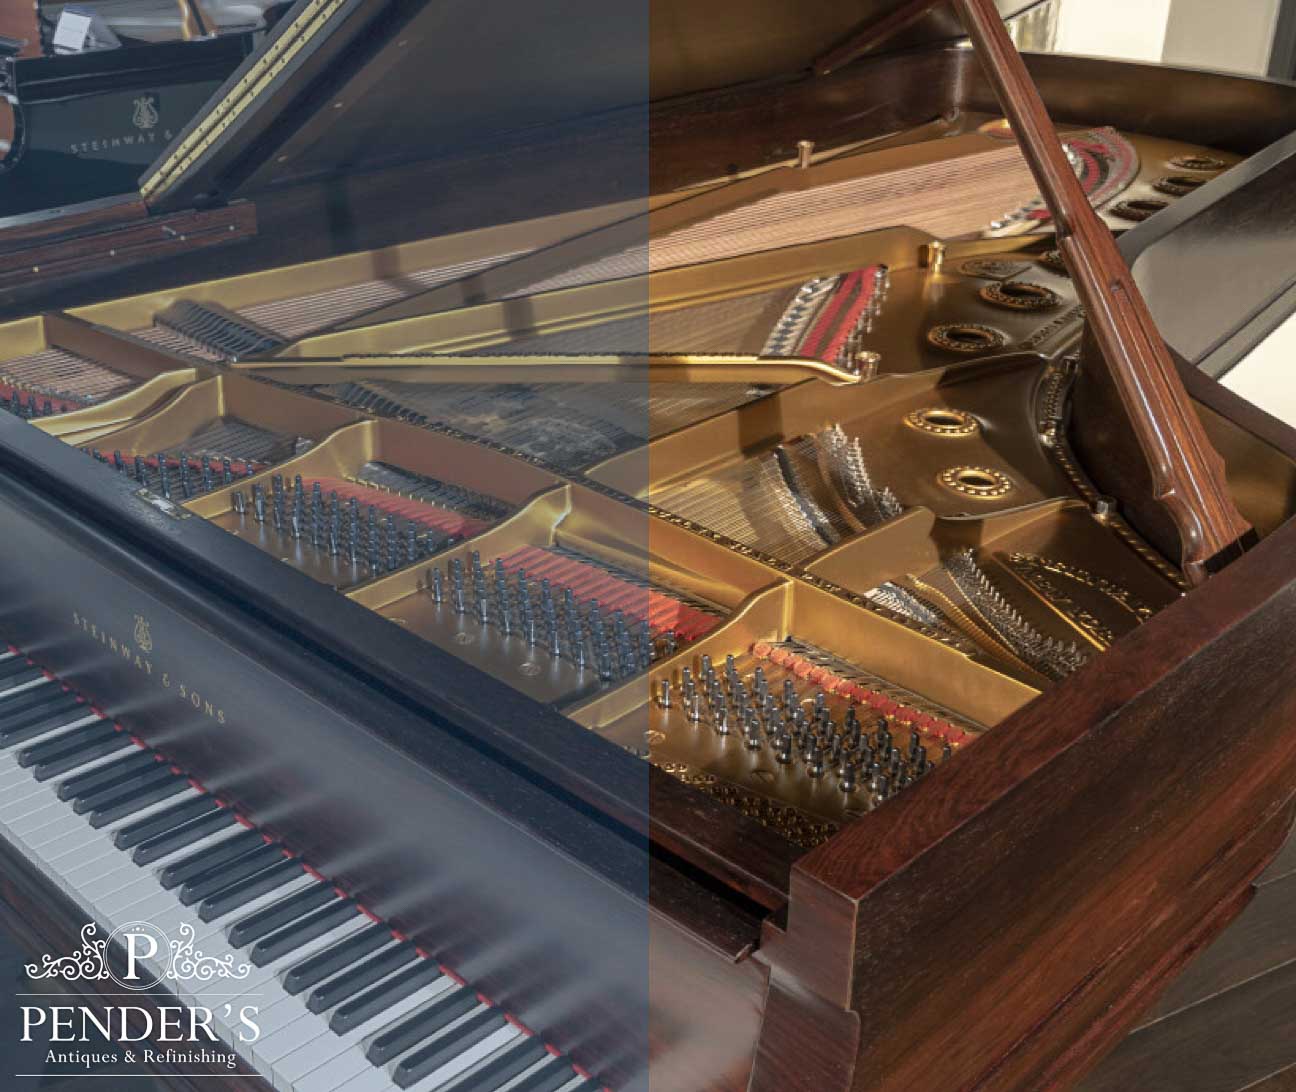 A steinway & sons grand piano